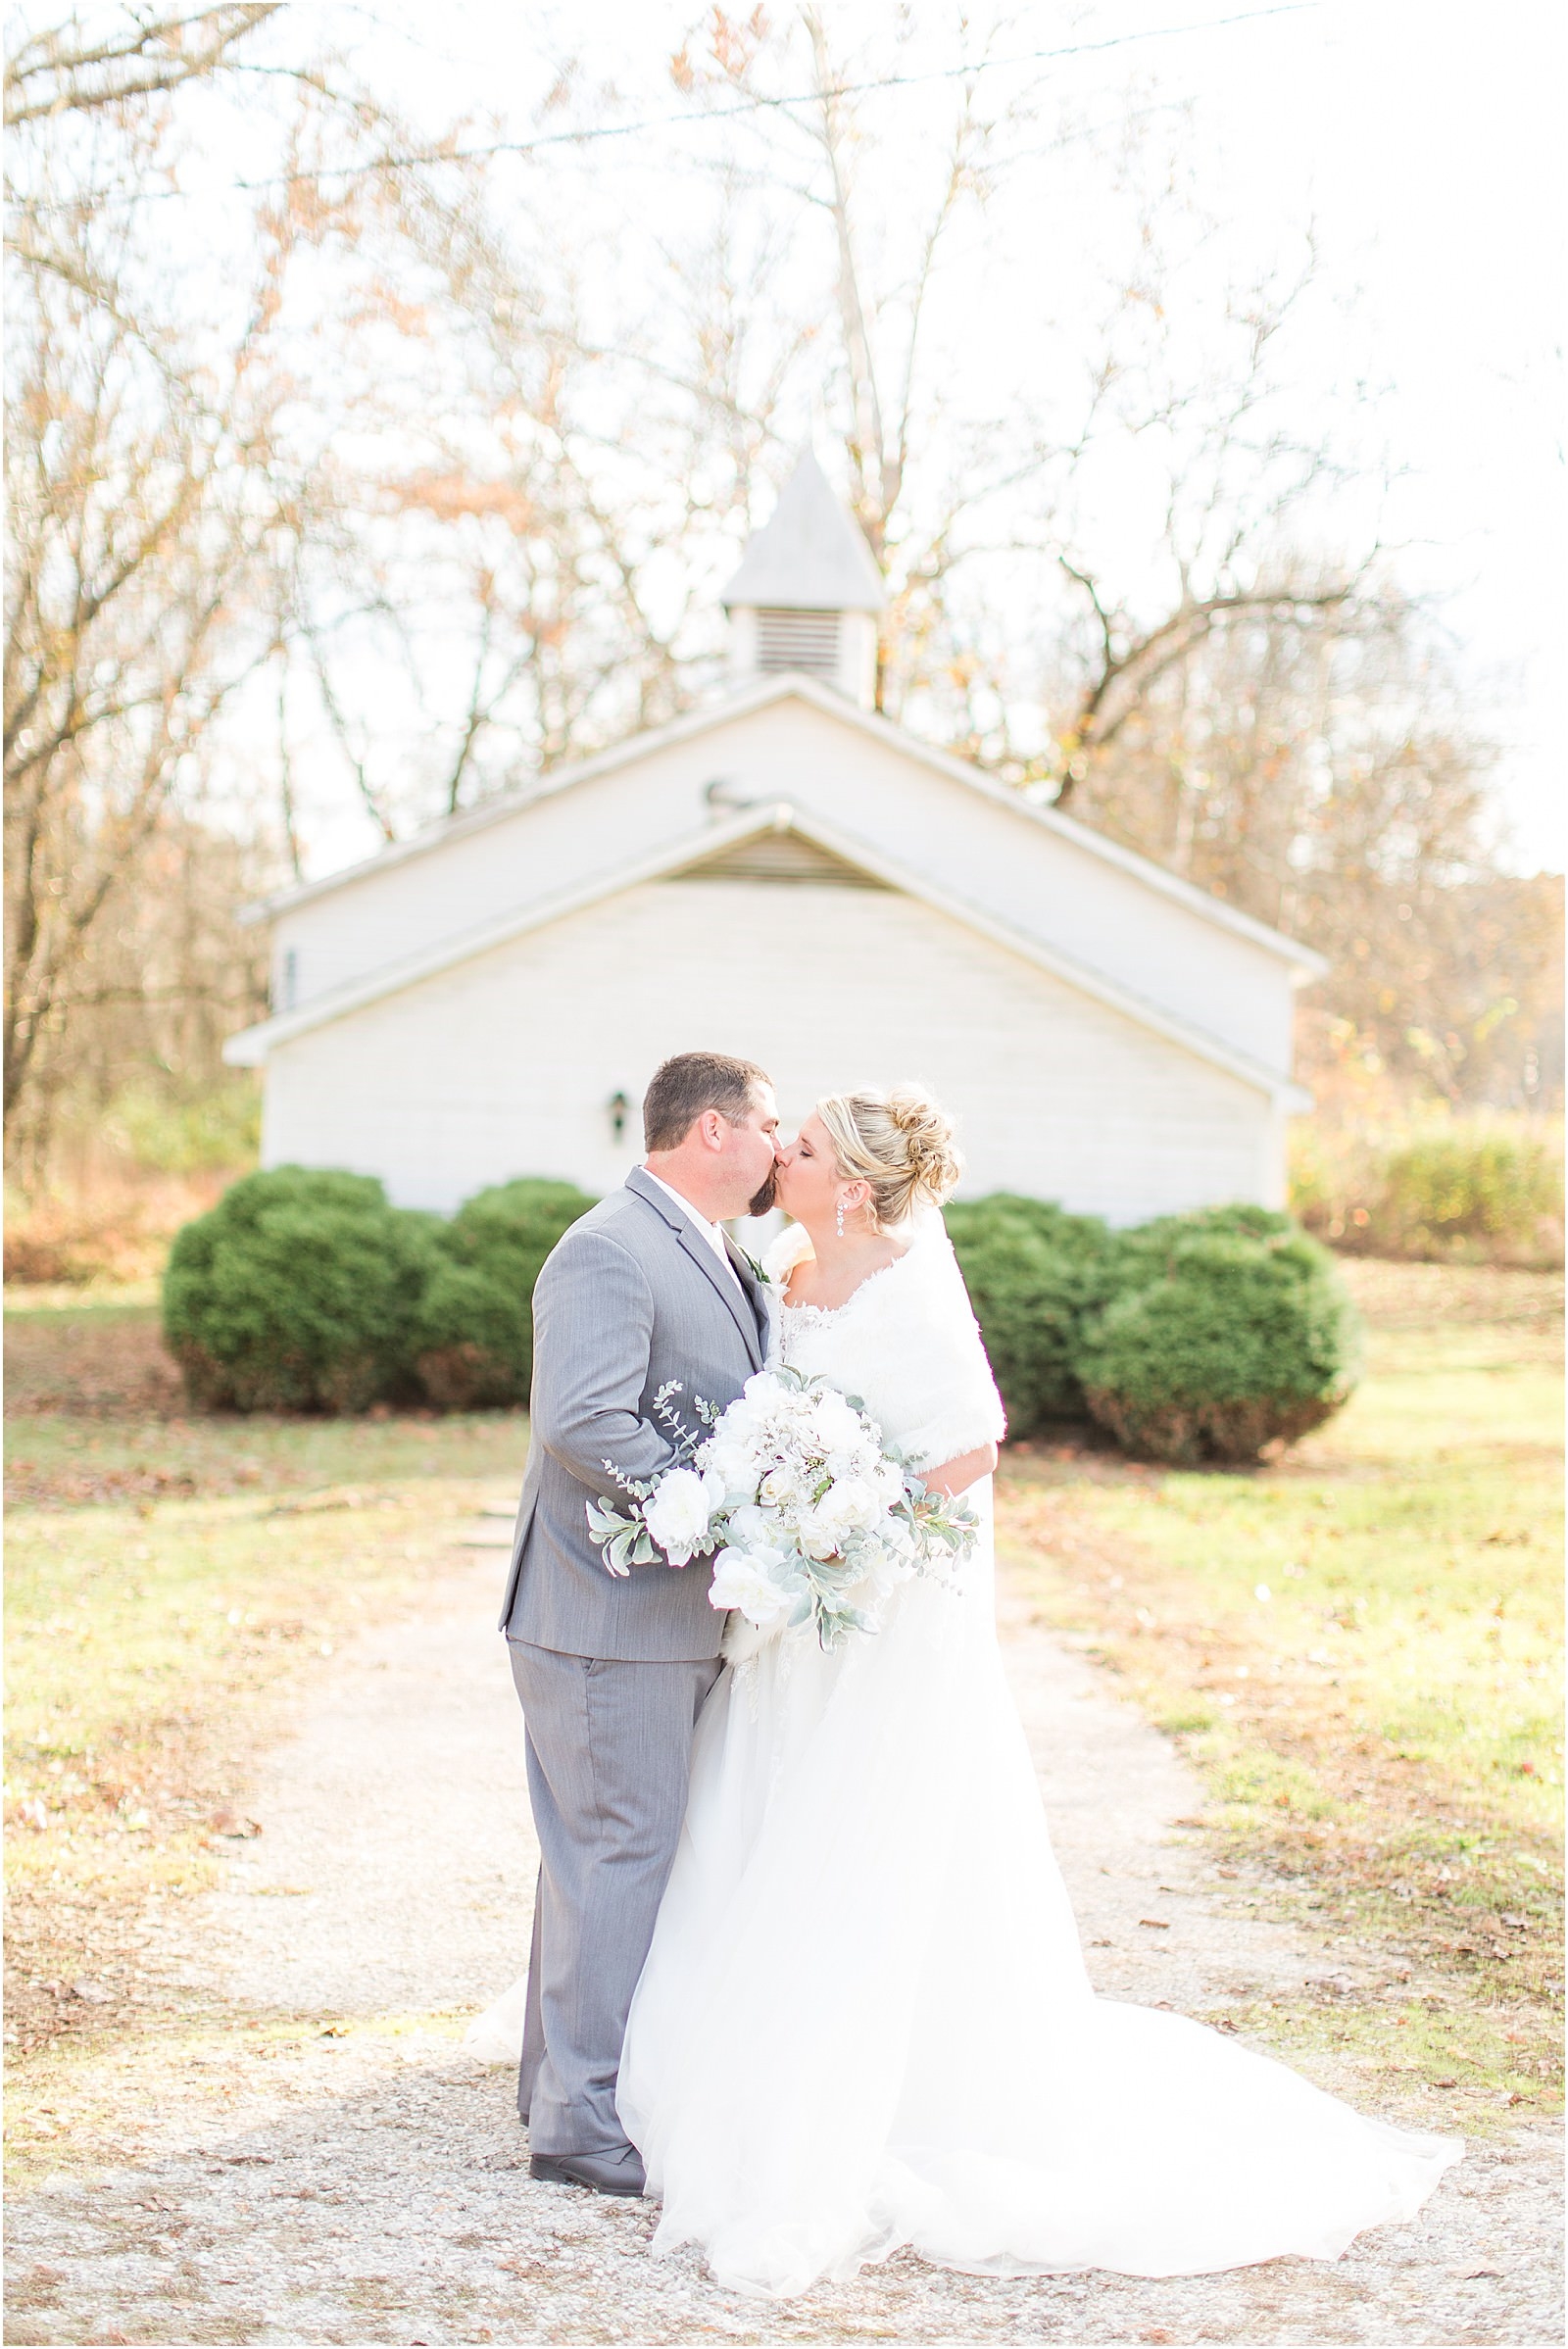 A Navy and Blush Wedding in Tell City Indiana | Brianna and Matt | Bret and Brandie Photography 0137.jpg